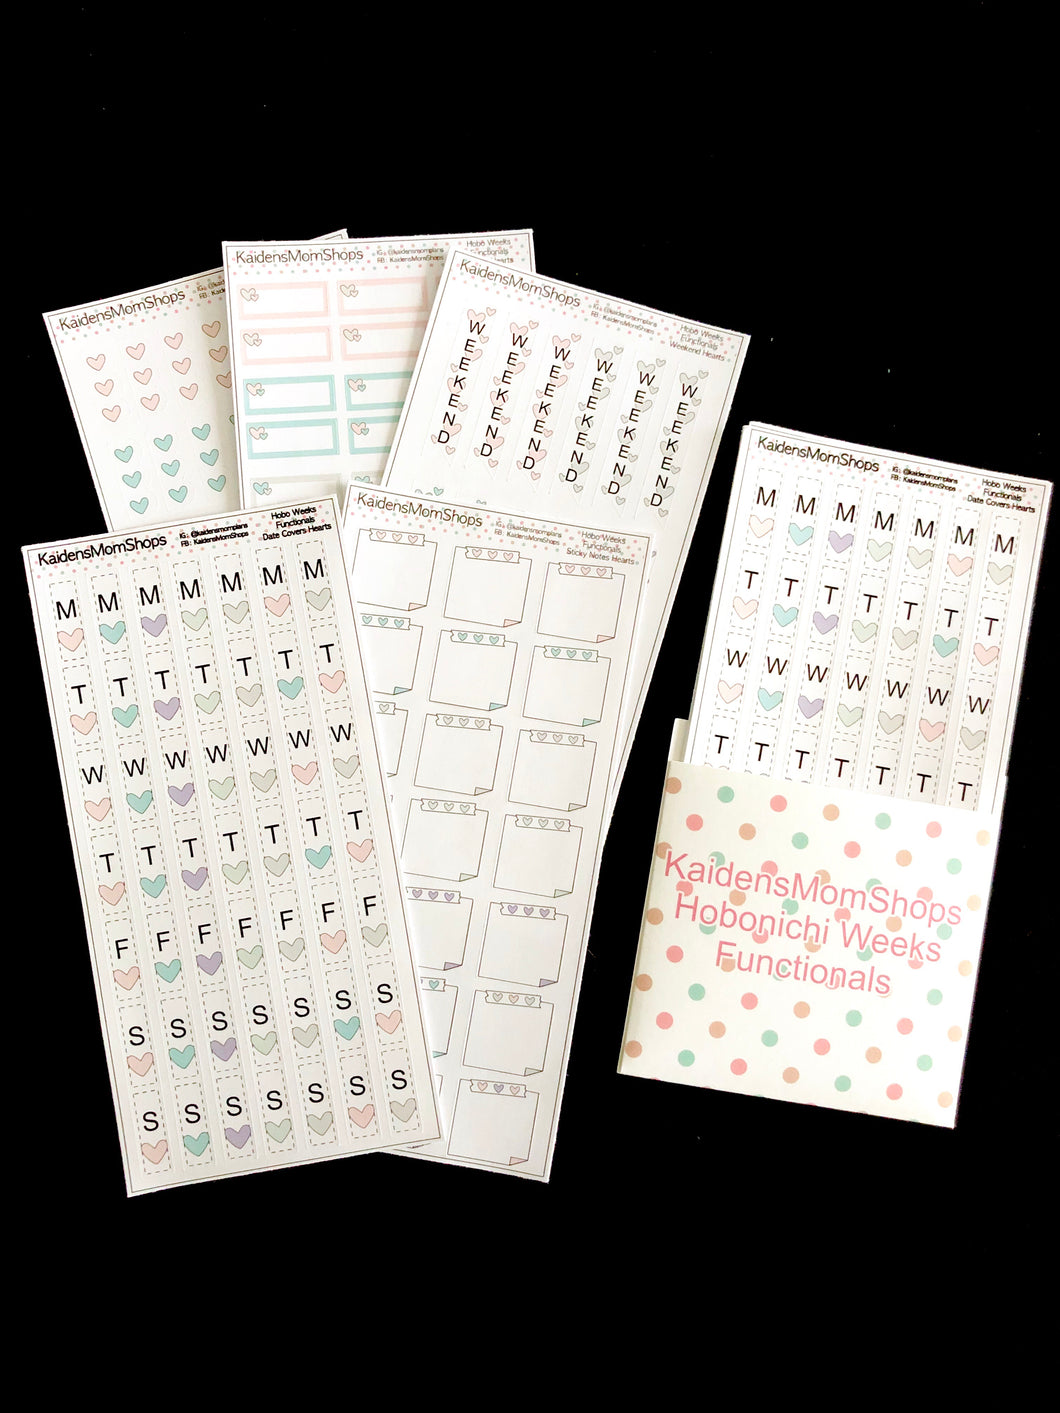 Hobonichi Weeks Functional Sticker Collection - Hearts